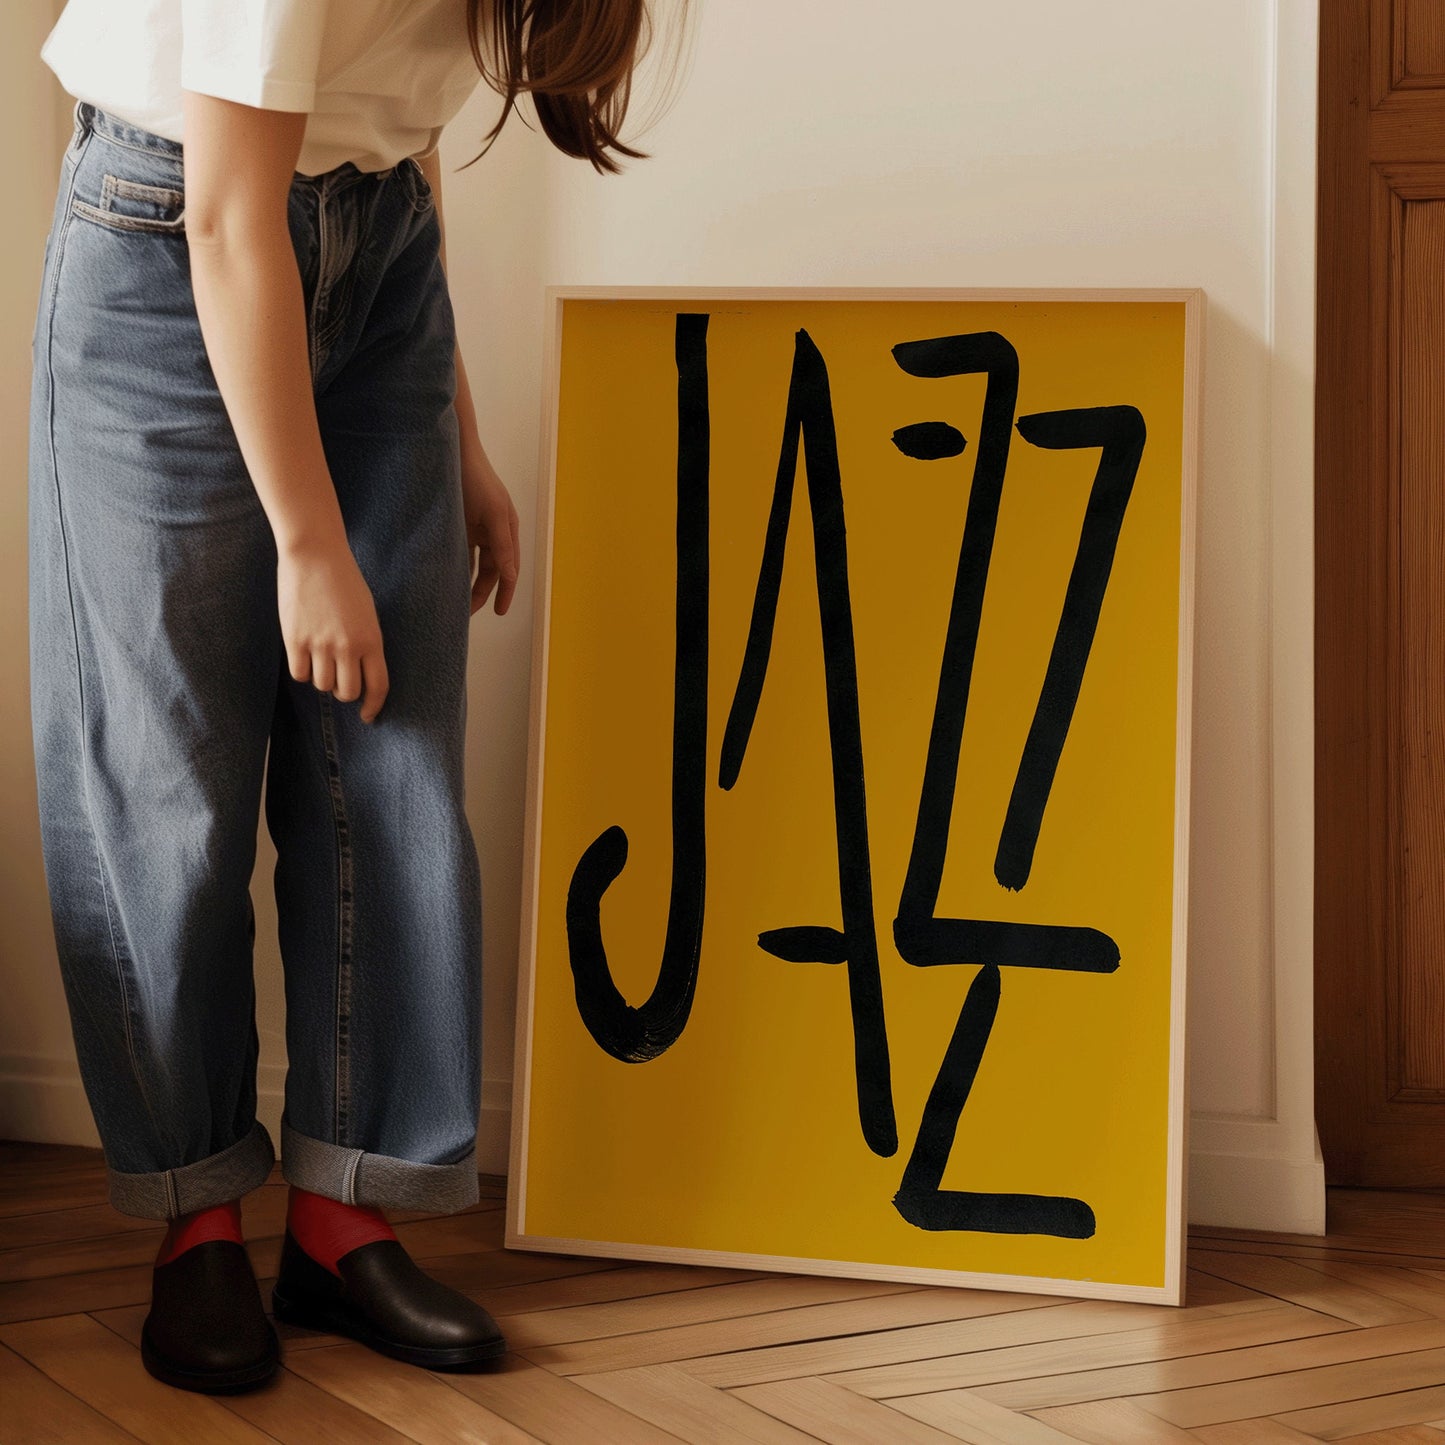 Henri Matisse - JAZZ (Mustard Yellow and Black) | Vintage Mid-Century Modern Typography Poster (available framed or unframed)